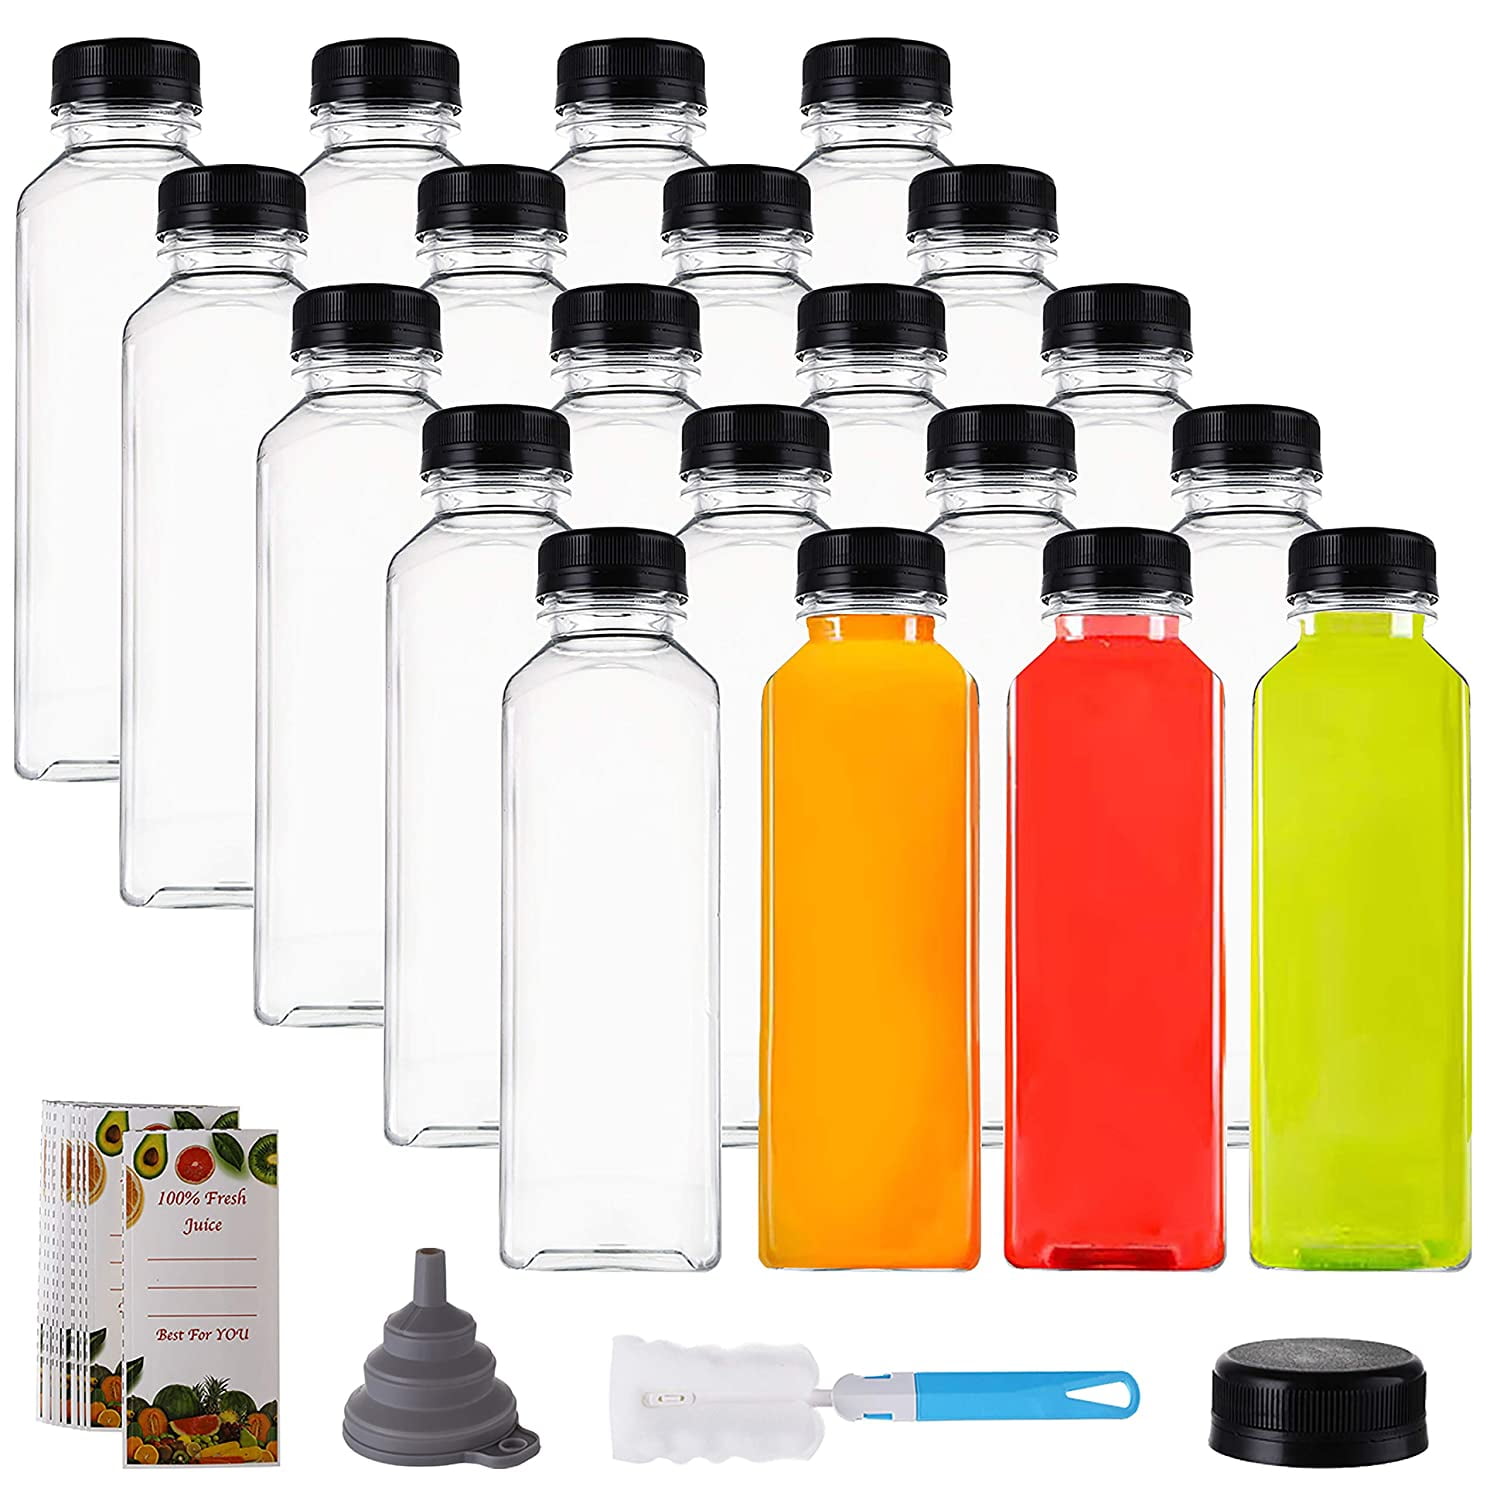 16 OZ Glass Bottles with Caps 10 Juice Bottles Smoothie Cup Containers Plastic Black Lids 